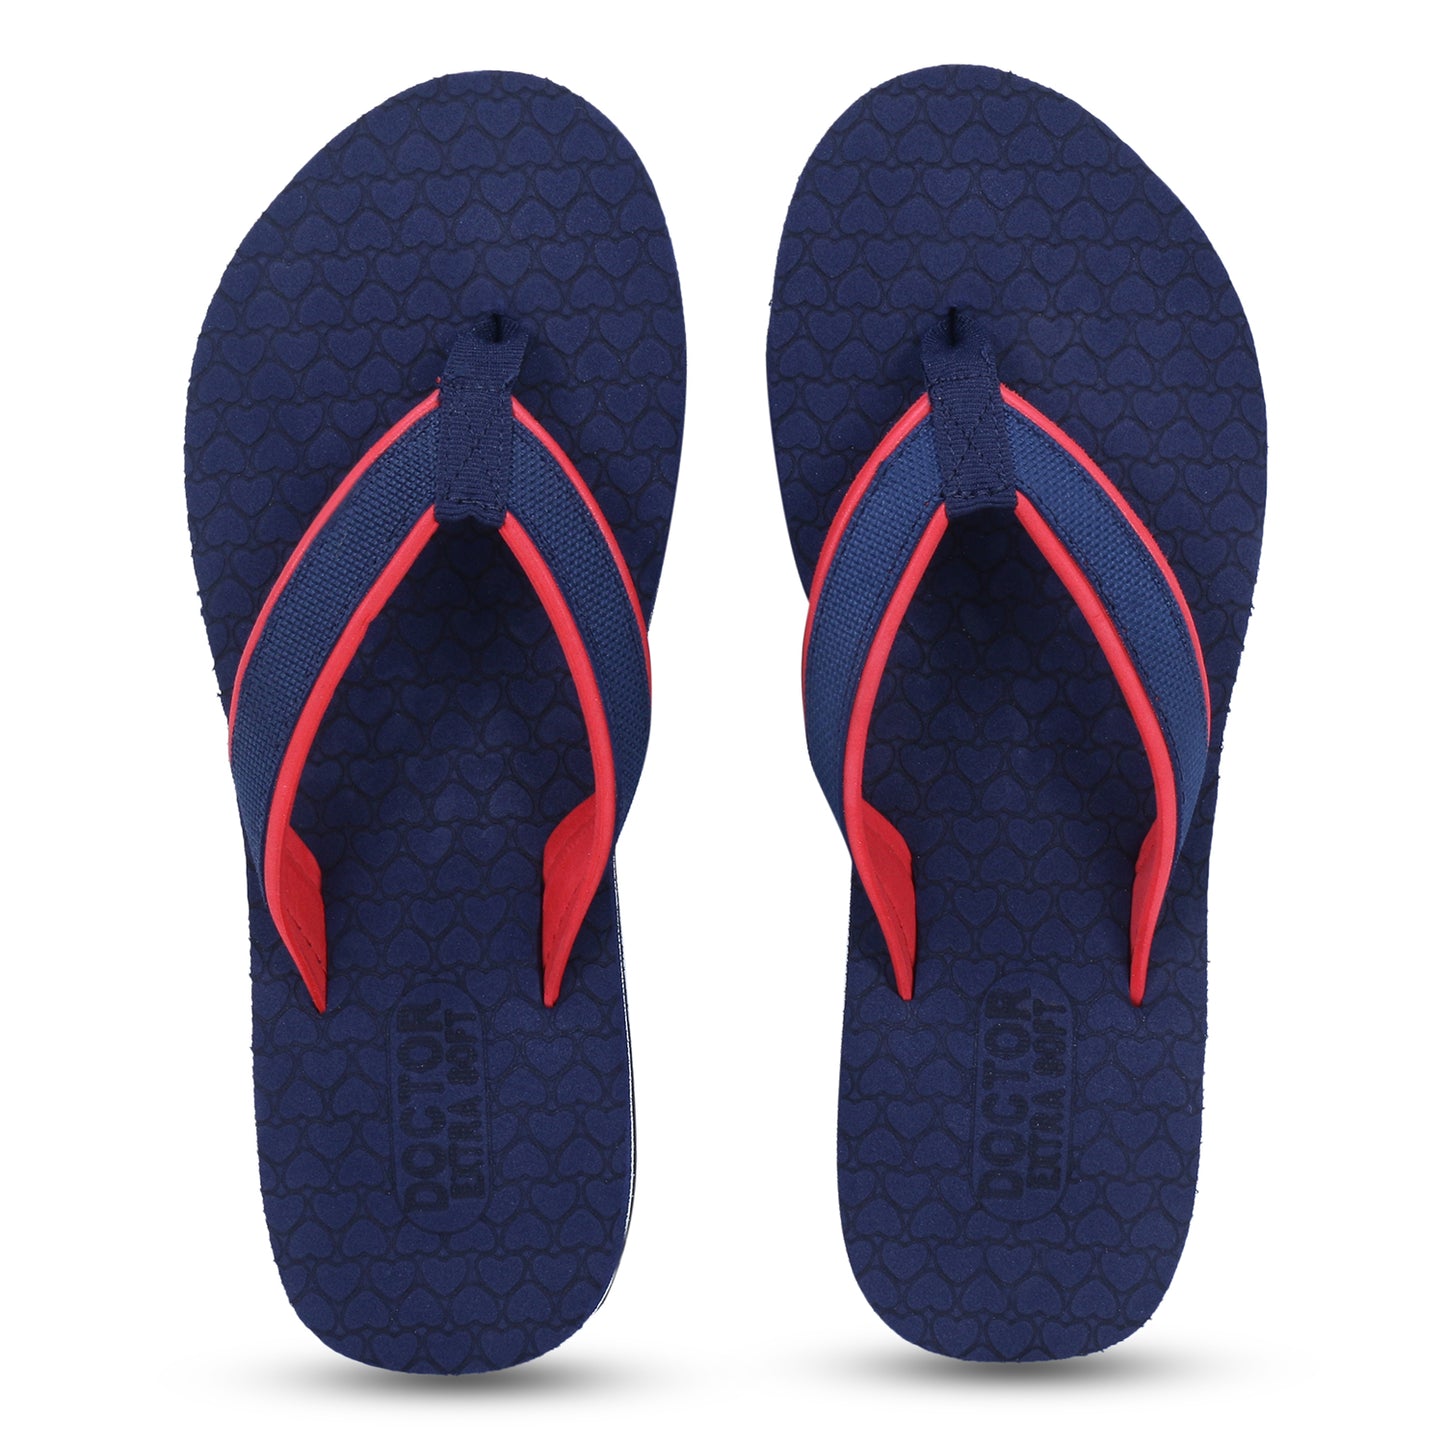 DOCTOR EXTRA SOFT D-03 Women's Slippers with Bounce Back Technology | Orthopaedic & Diabetic | MCR Anti-skid Cushion Comfort Dr Sliders Flipflops & House Chappal